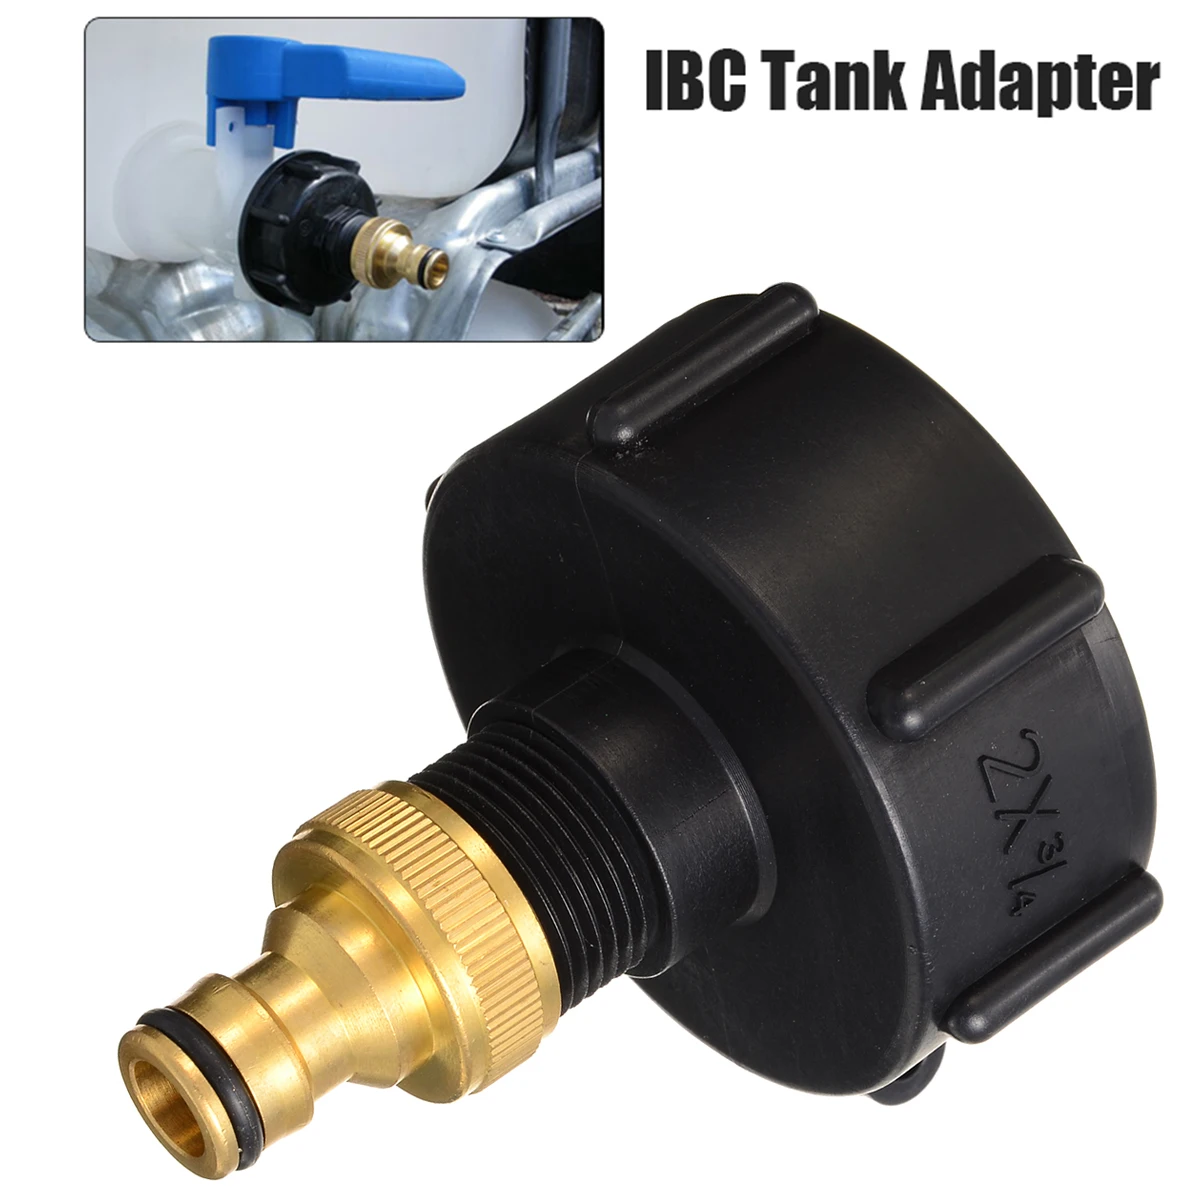 IBC Adapter 3/4 "Outlet Tap Rainwater Tank Adapter 1000L Water Tank Connection